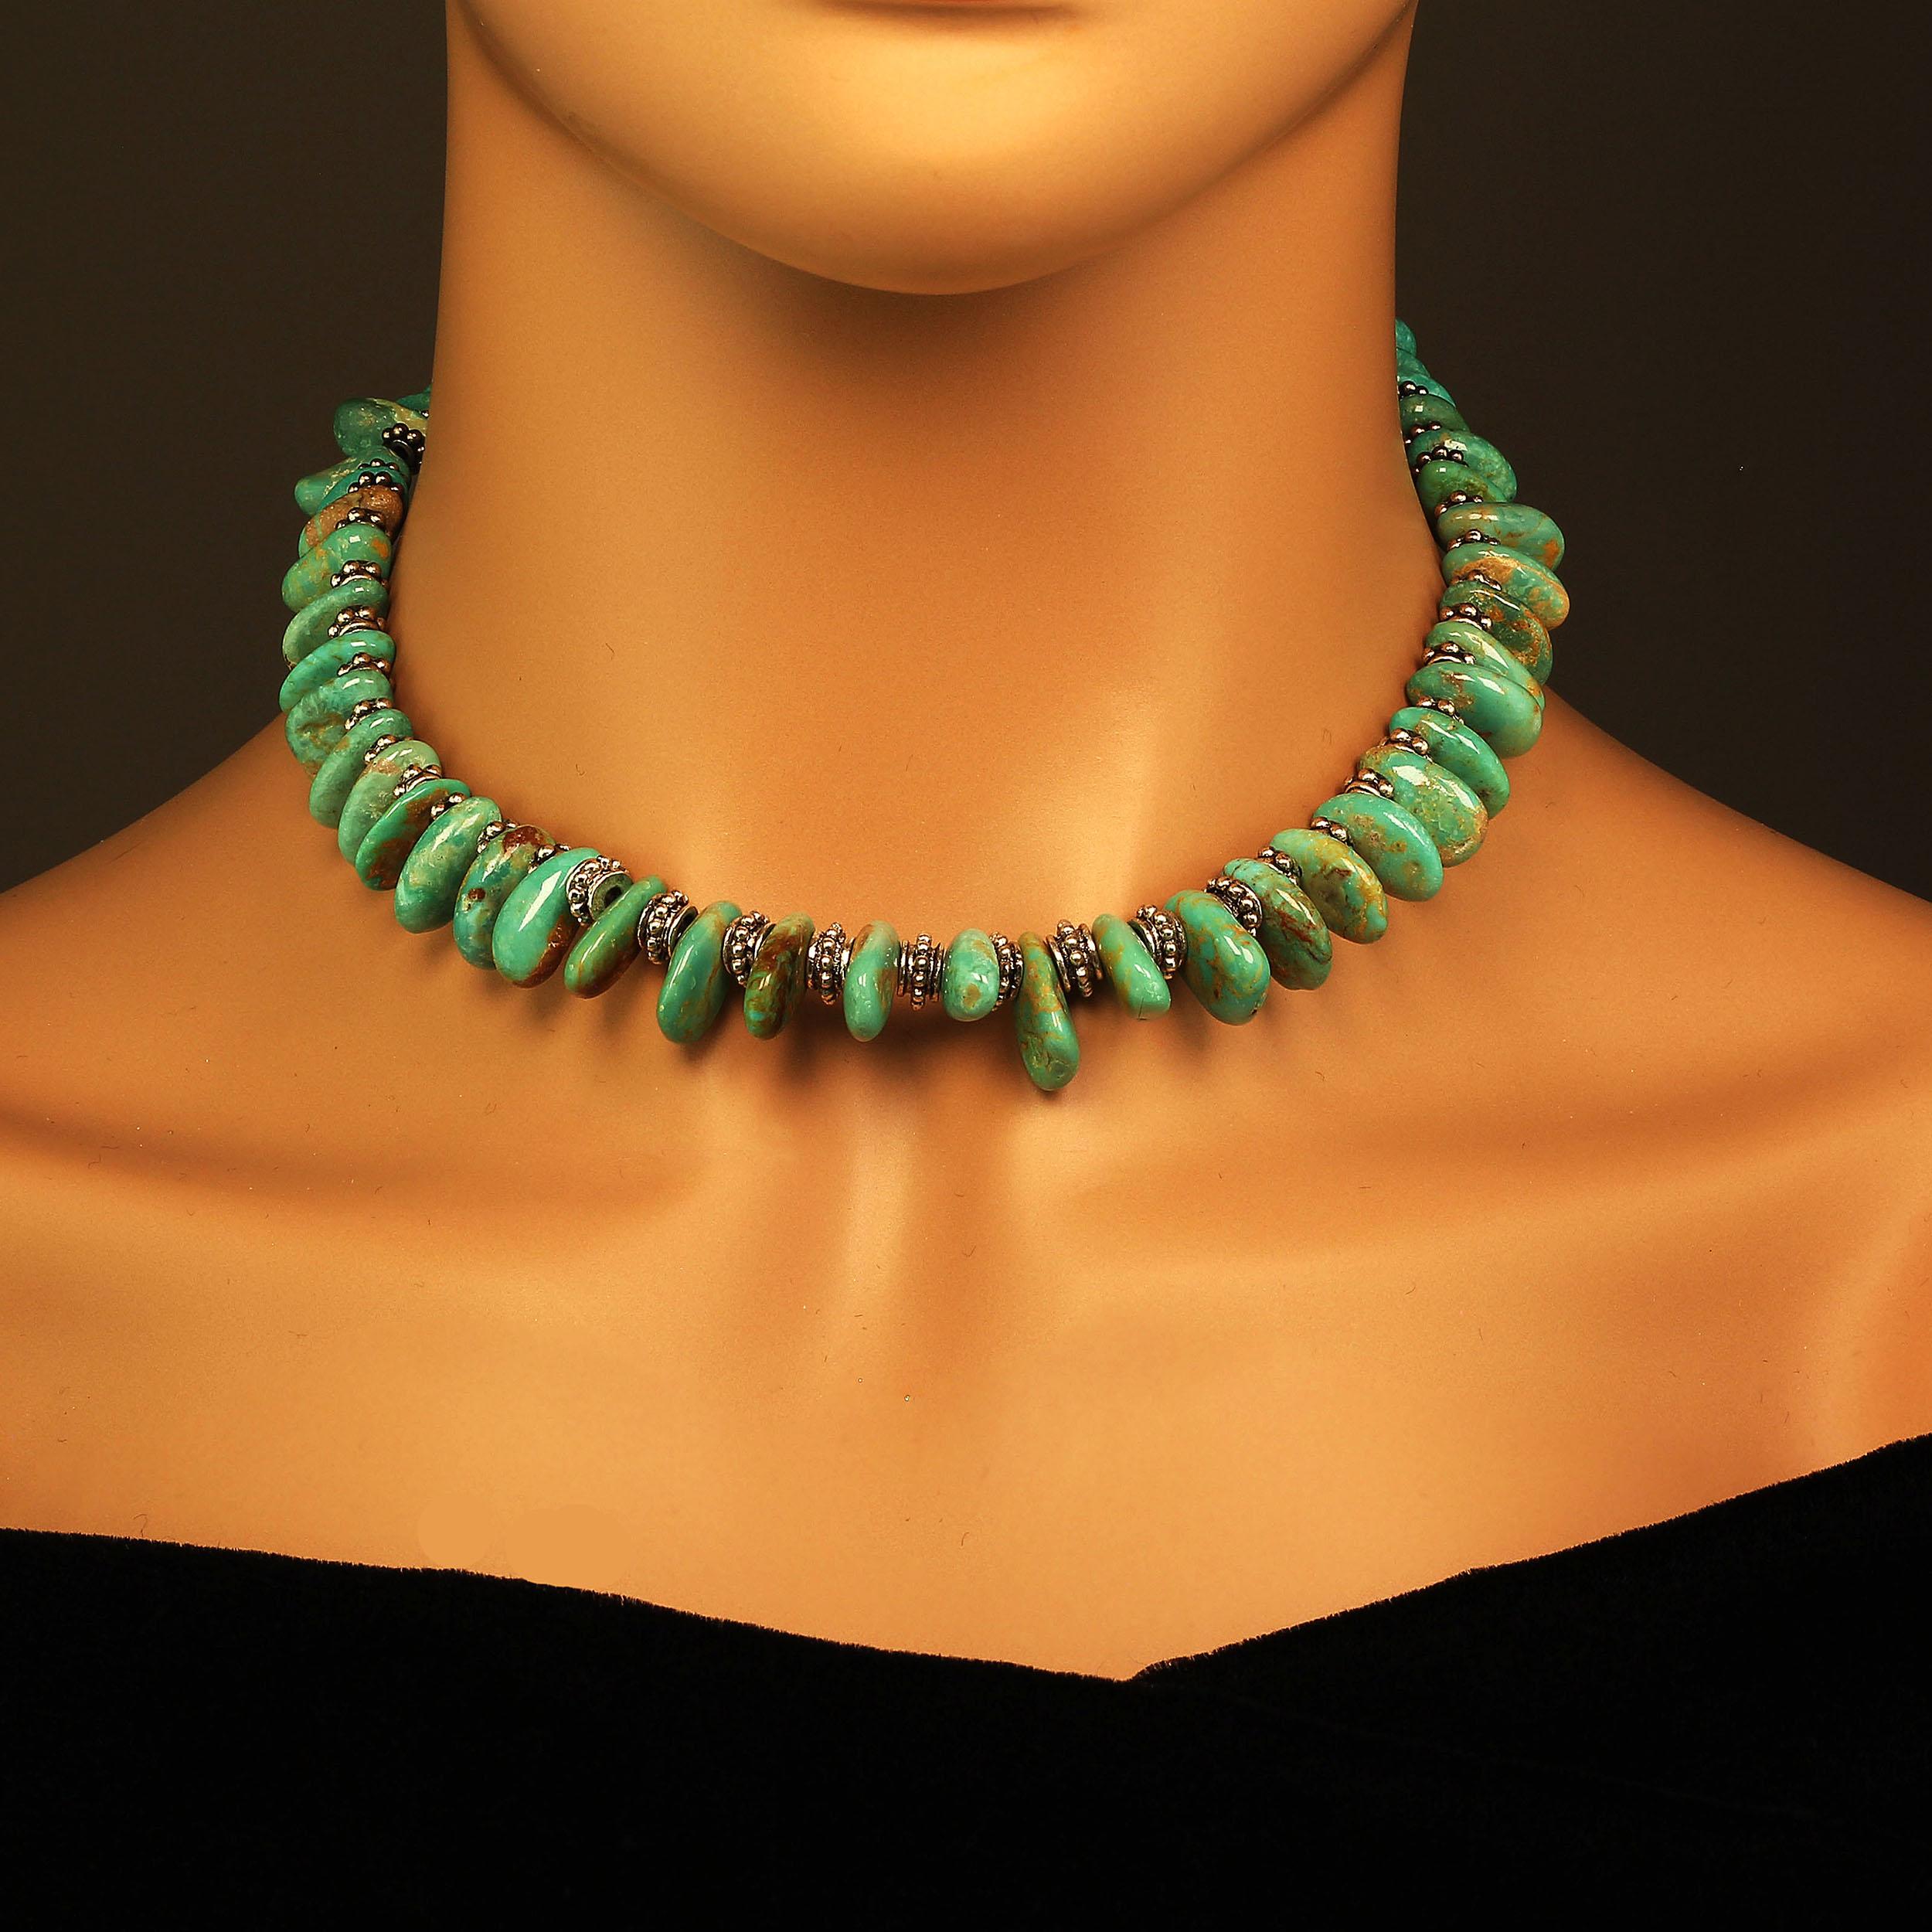 Delicate 16 inch choker necklace in World Famous Elisa Turquoise teardrops. and Bali beads. This gorgeous combination is unique.  These Elisa Turquoise teardrops are an average size of 15 X 9 MM.  This unique choker is secured with a Celtic knot